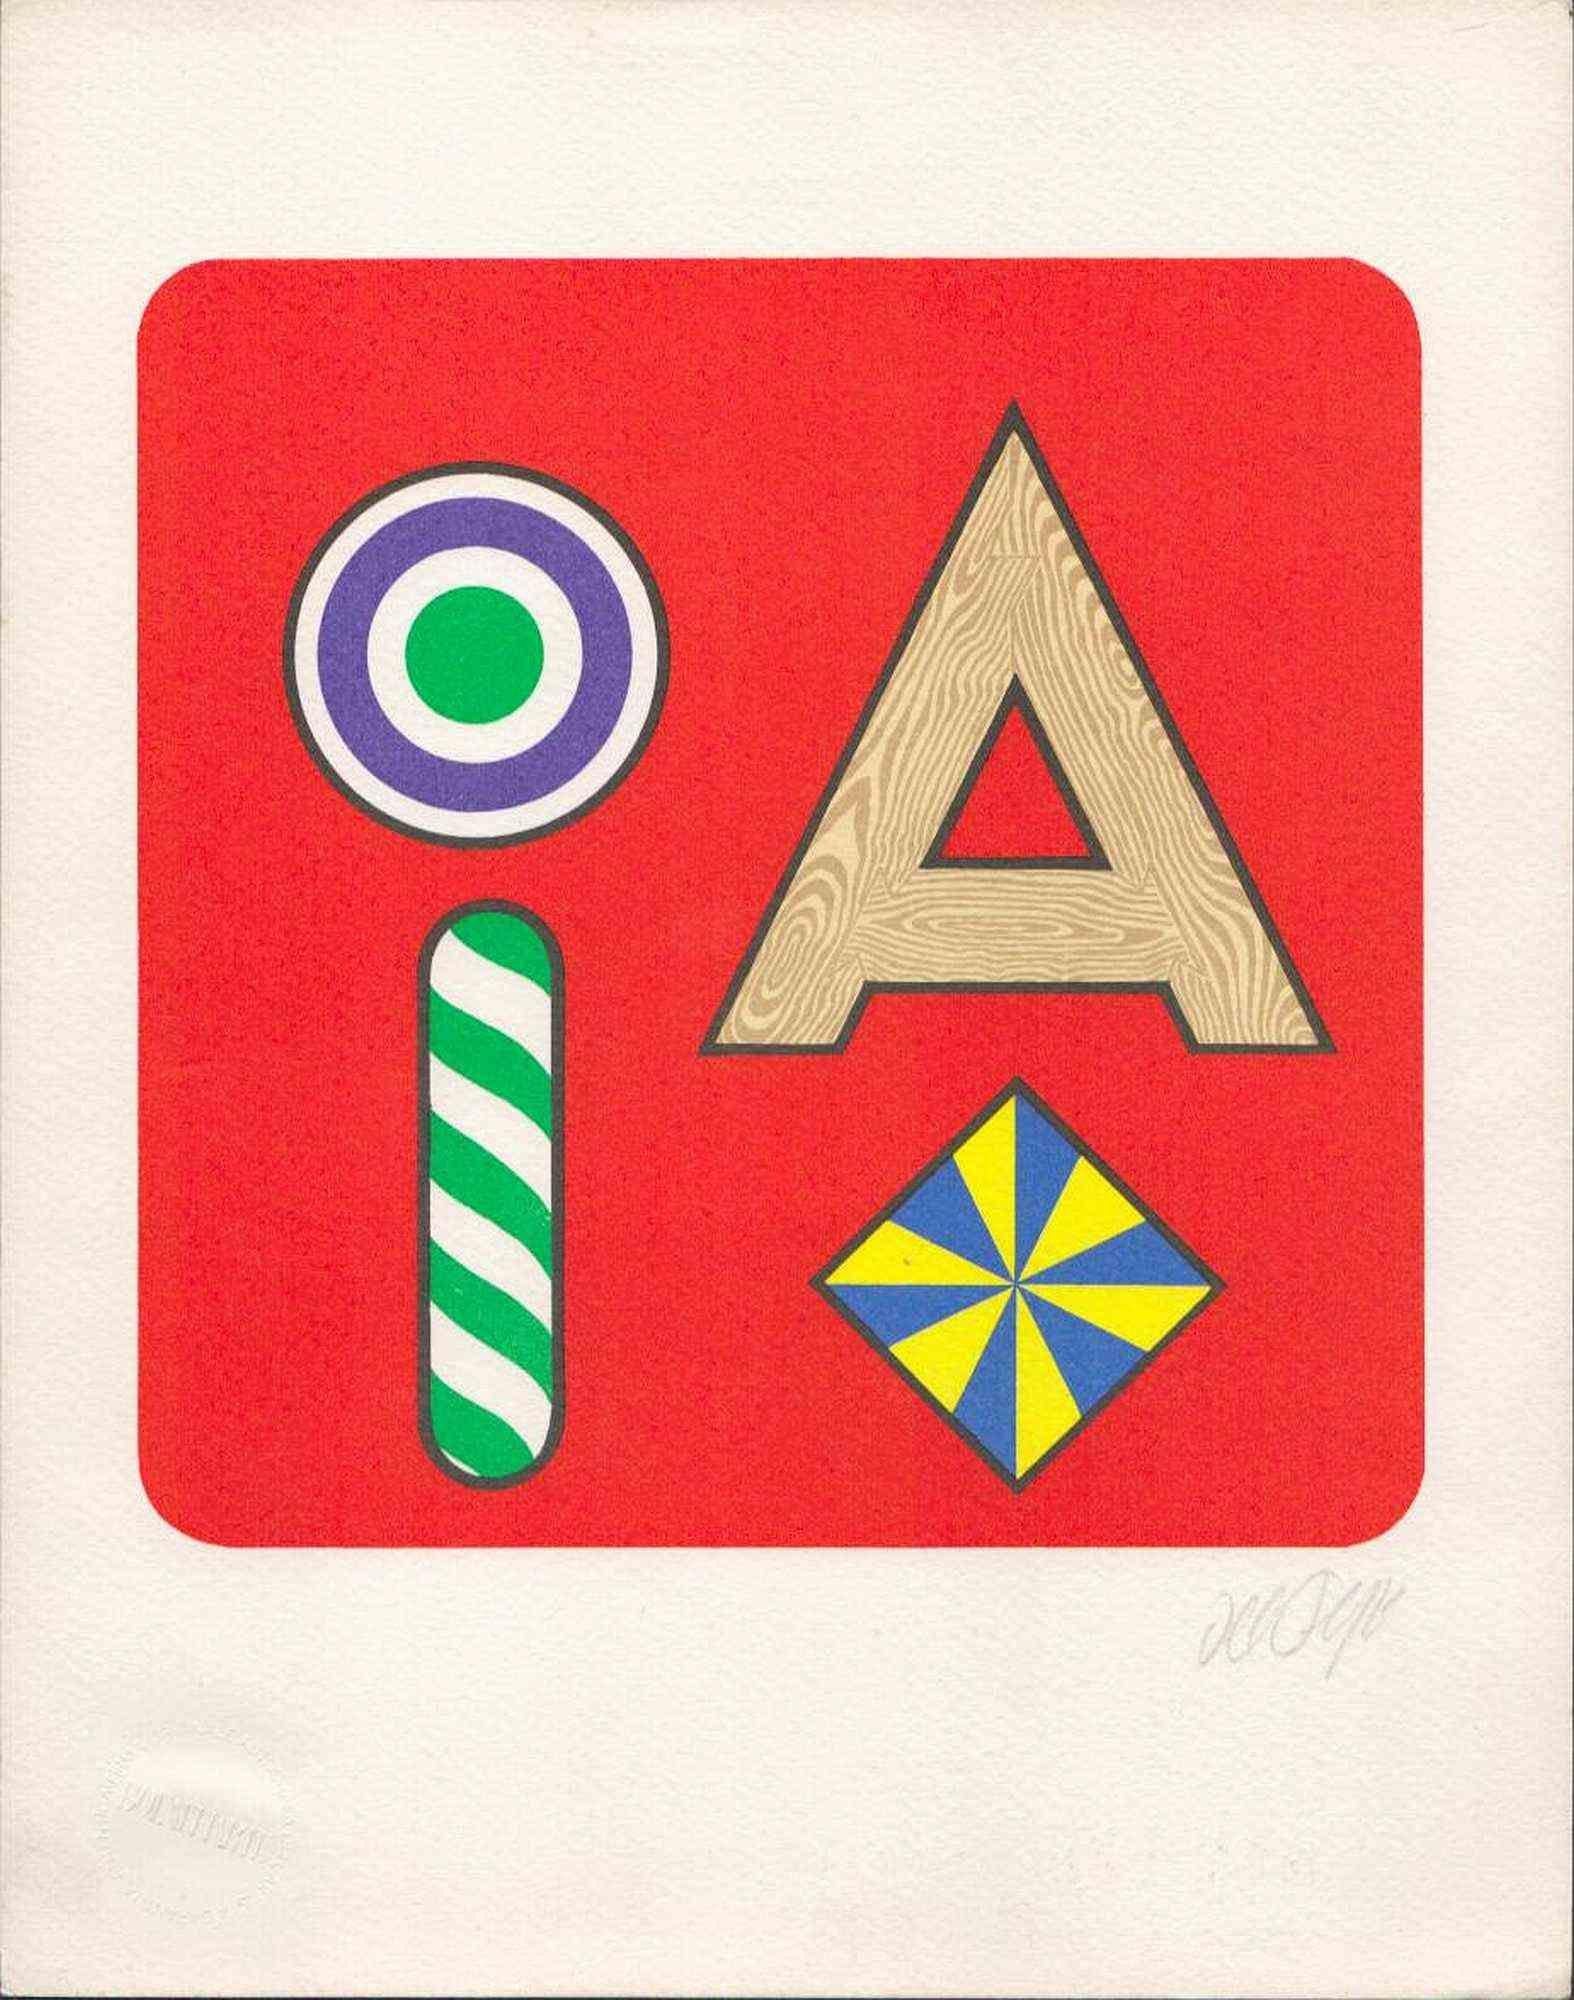 Lucio Del Pezzo (1933-2020)

Letter A, 1971
Photolithograph, 30 x 24 cm
From the series The Alphabet of Bolaffi. Edition 3,433 / 5000, signed in pencil by the artist. Printed on the paper with BolaffiArte embossed stamp.
Excellent condition. With